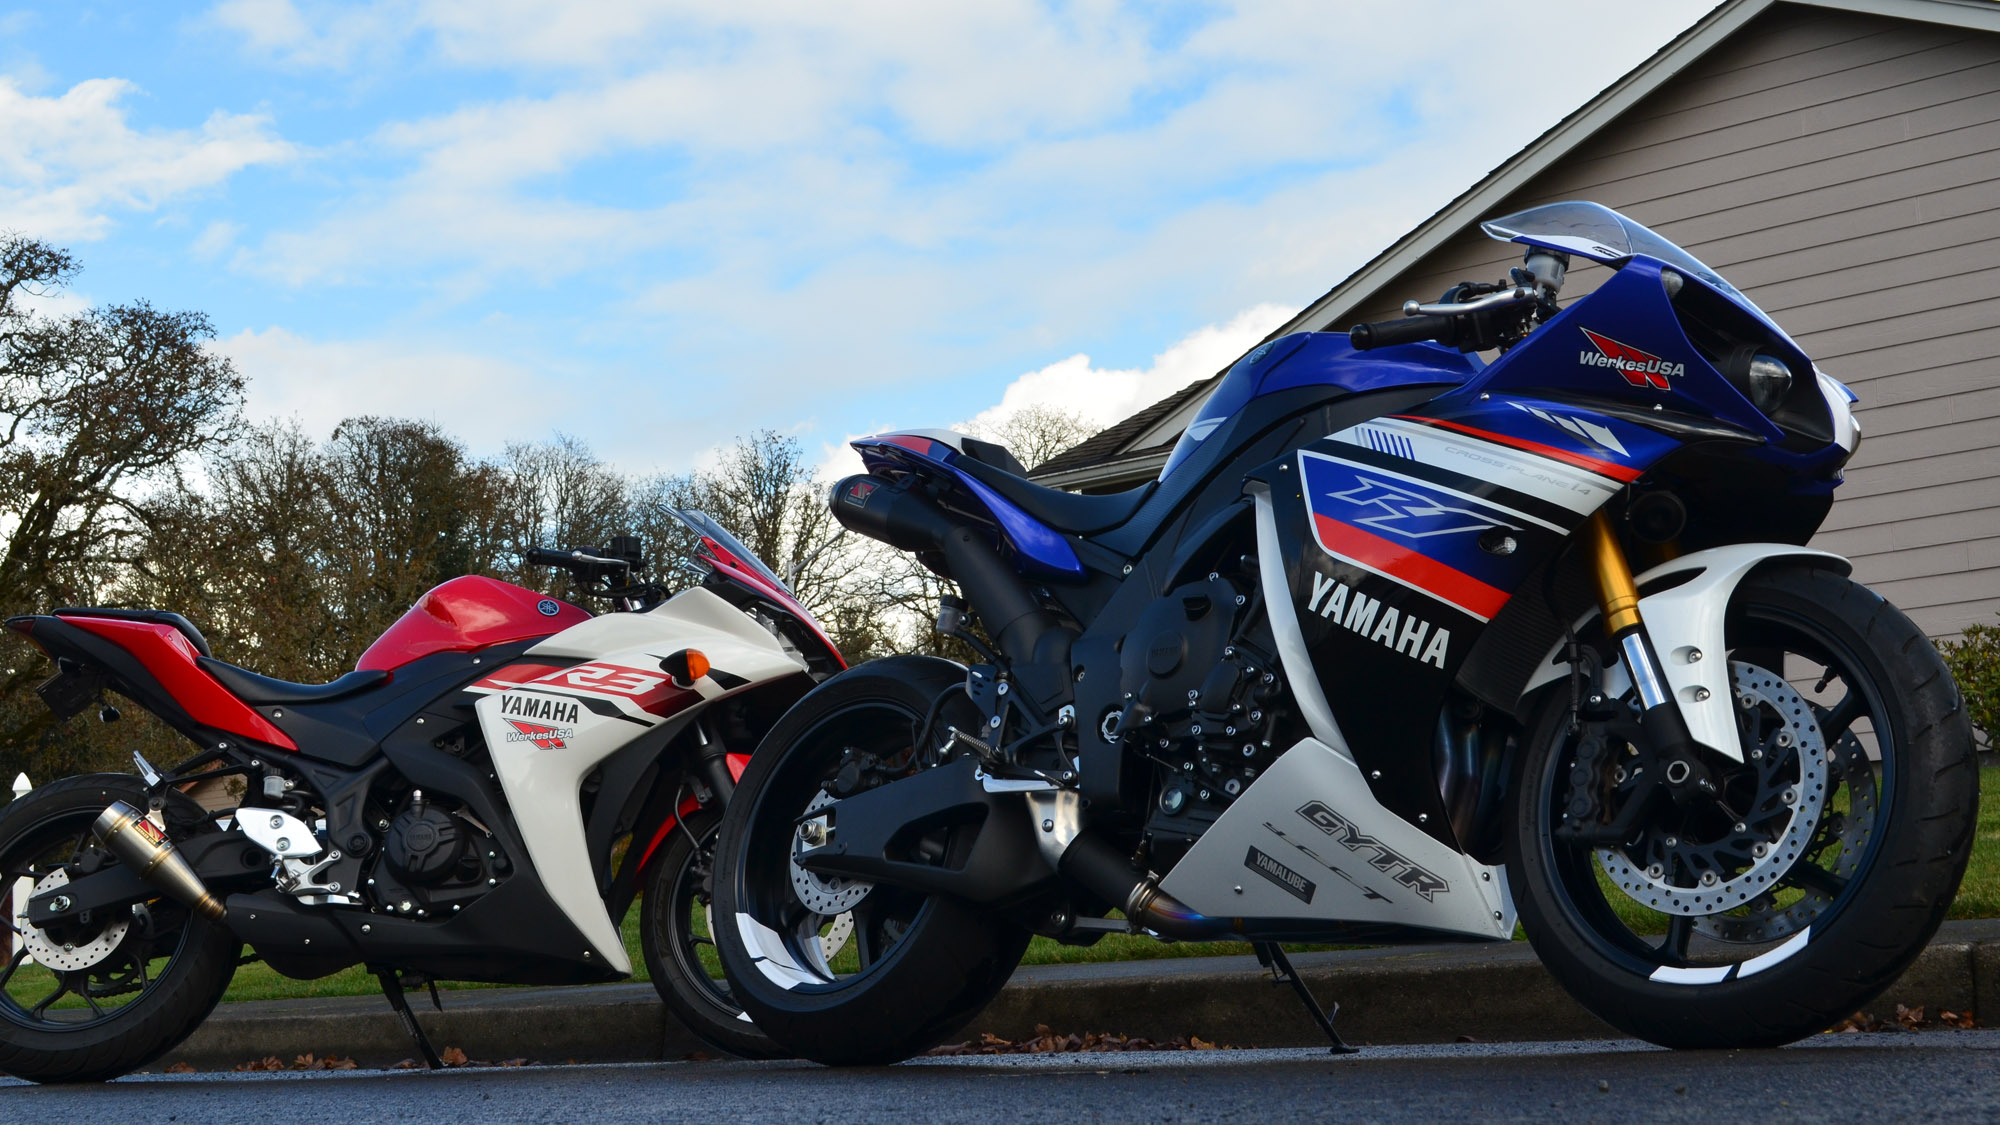 2013 Yamaha R1 for the 2017 Return to Track Days Series